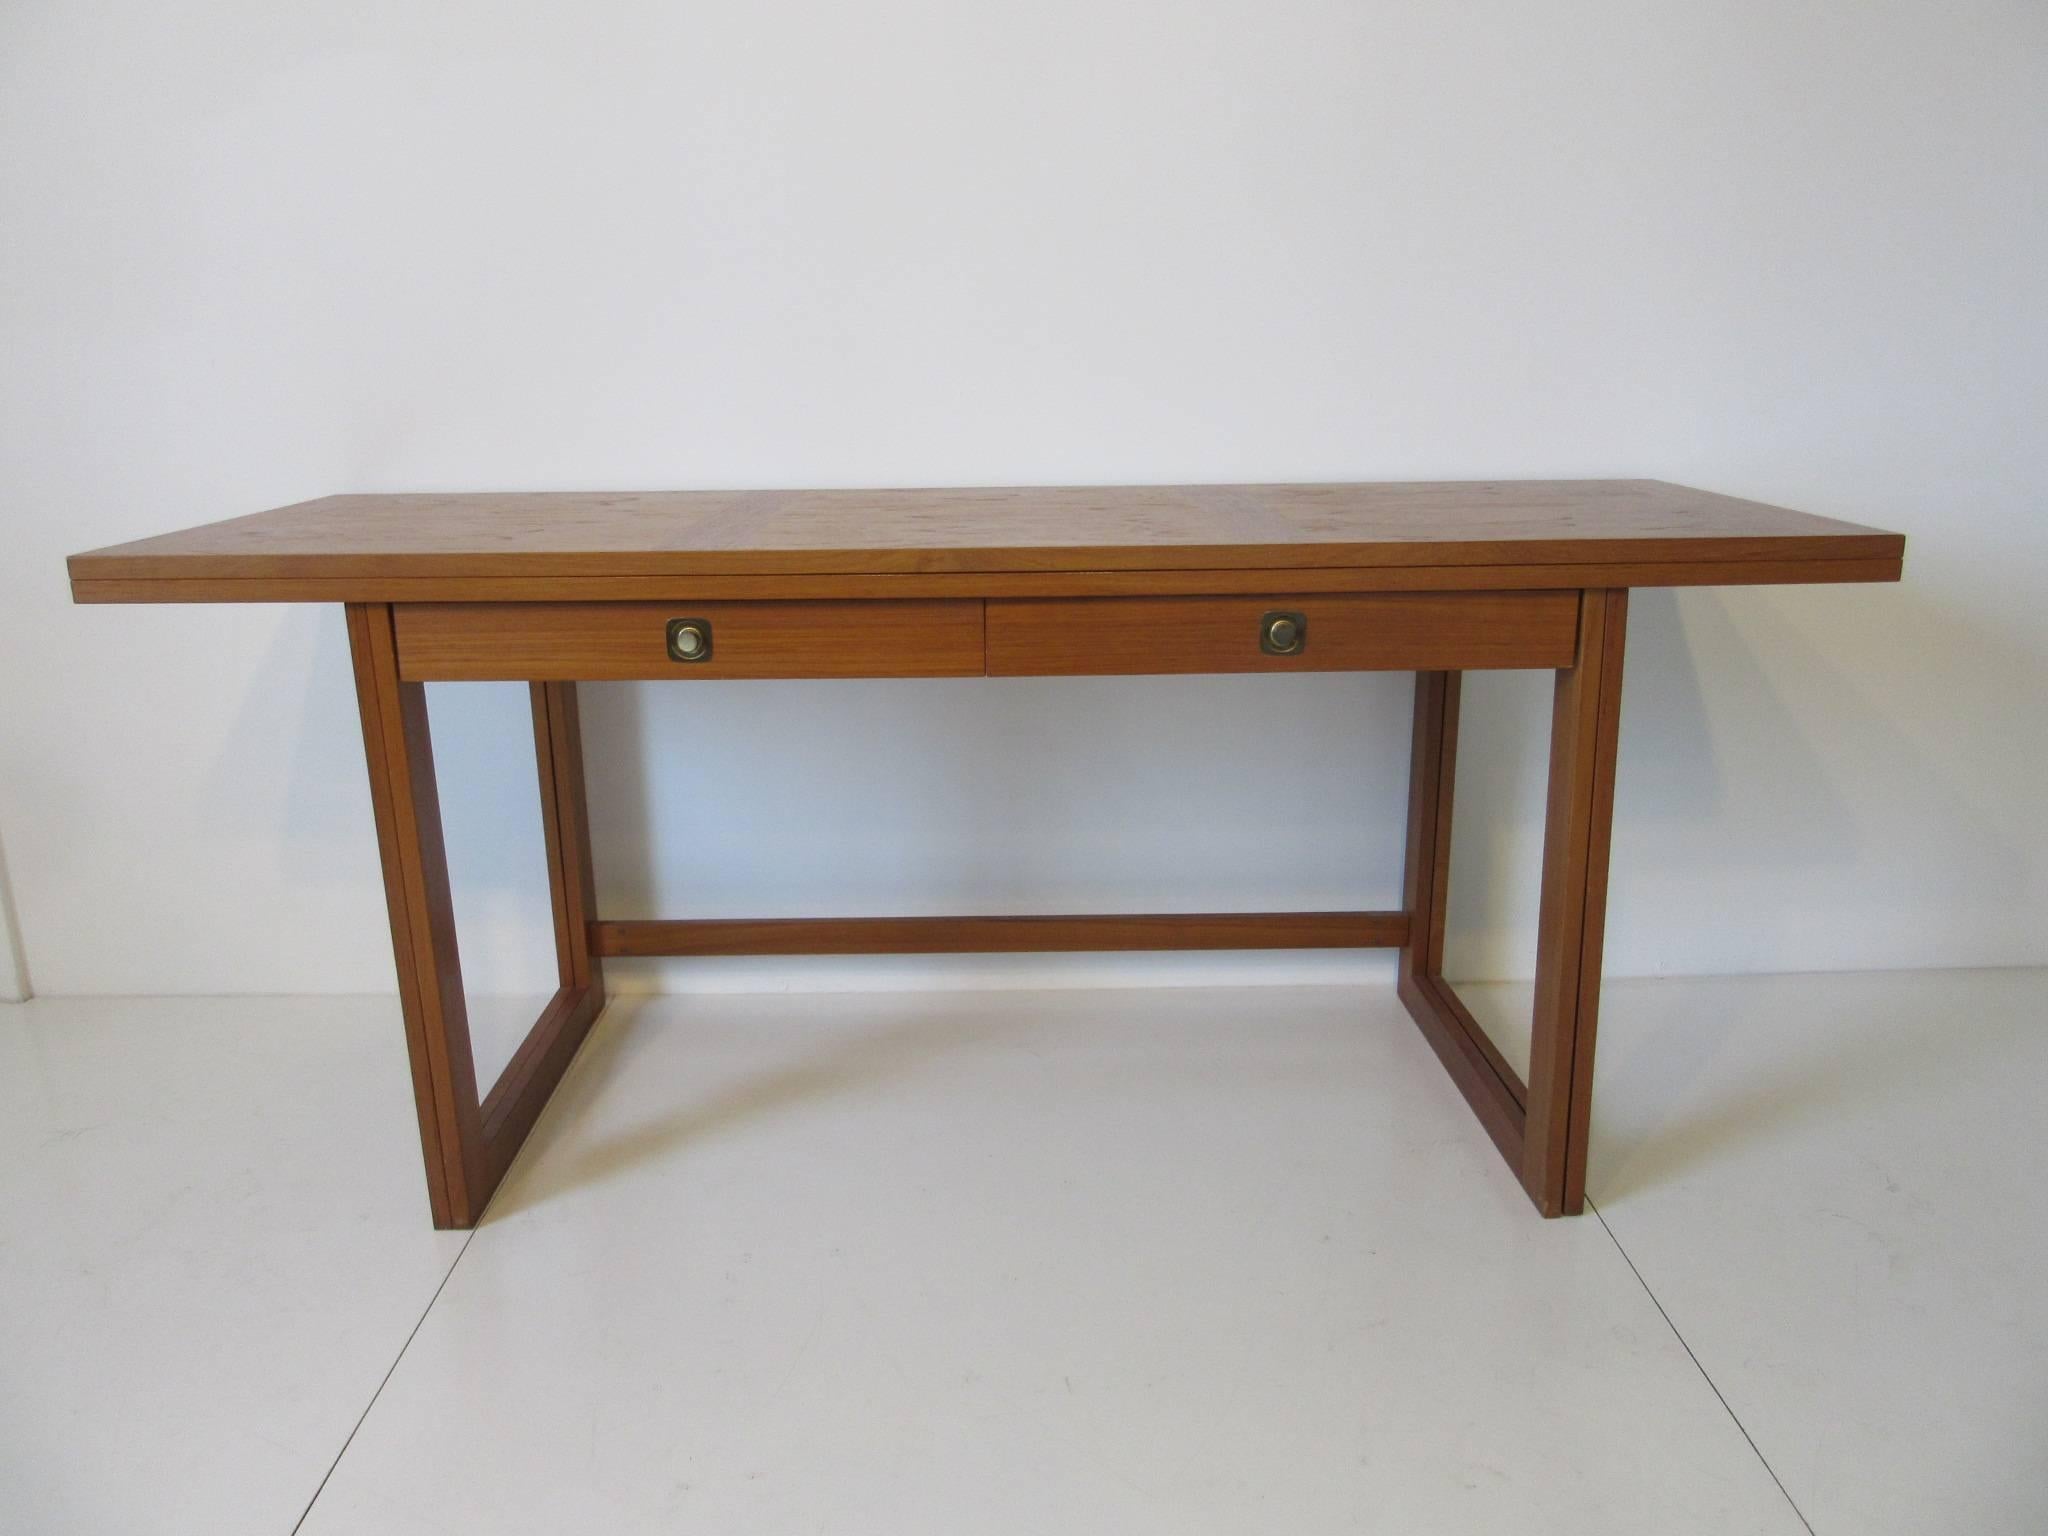 A creatively designed teak wood piece of furniture, it can be a desk with two small drawers and swing out the double legs, flip the top and it converts into a large dining table or work table. Beautiful grained wood , brass hinges and pulls makes